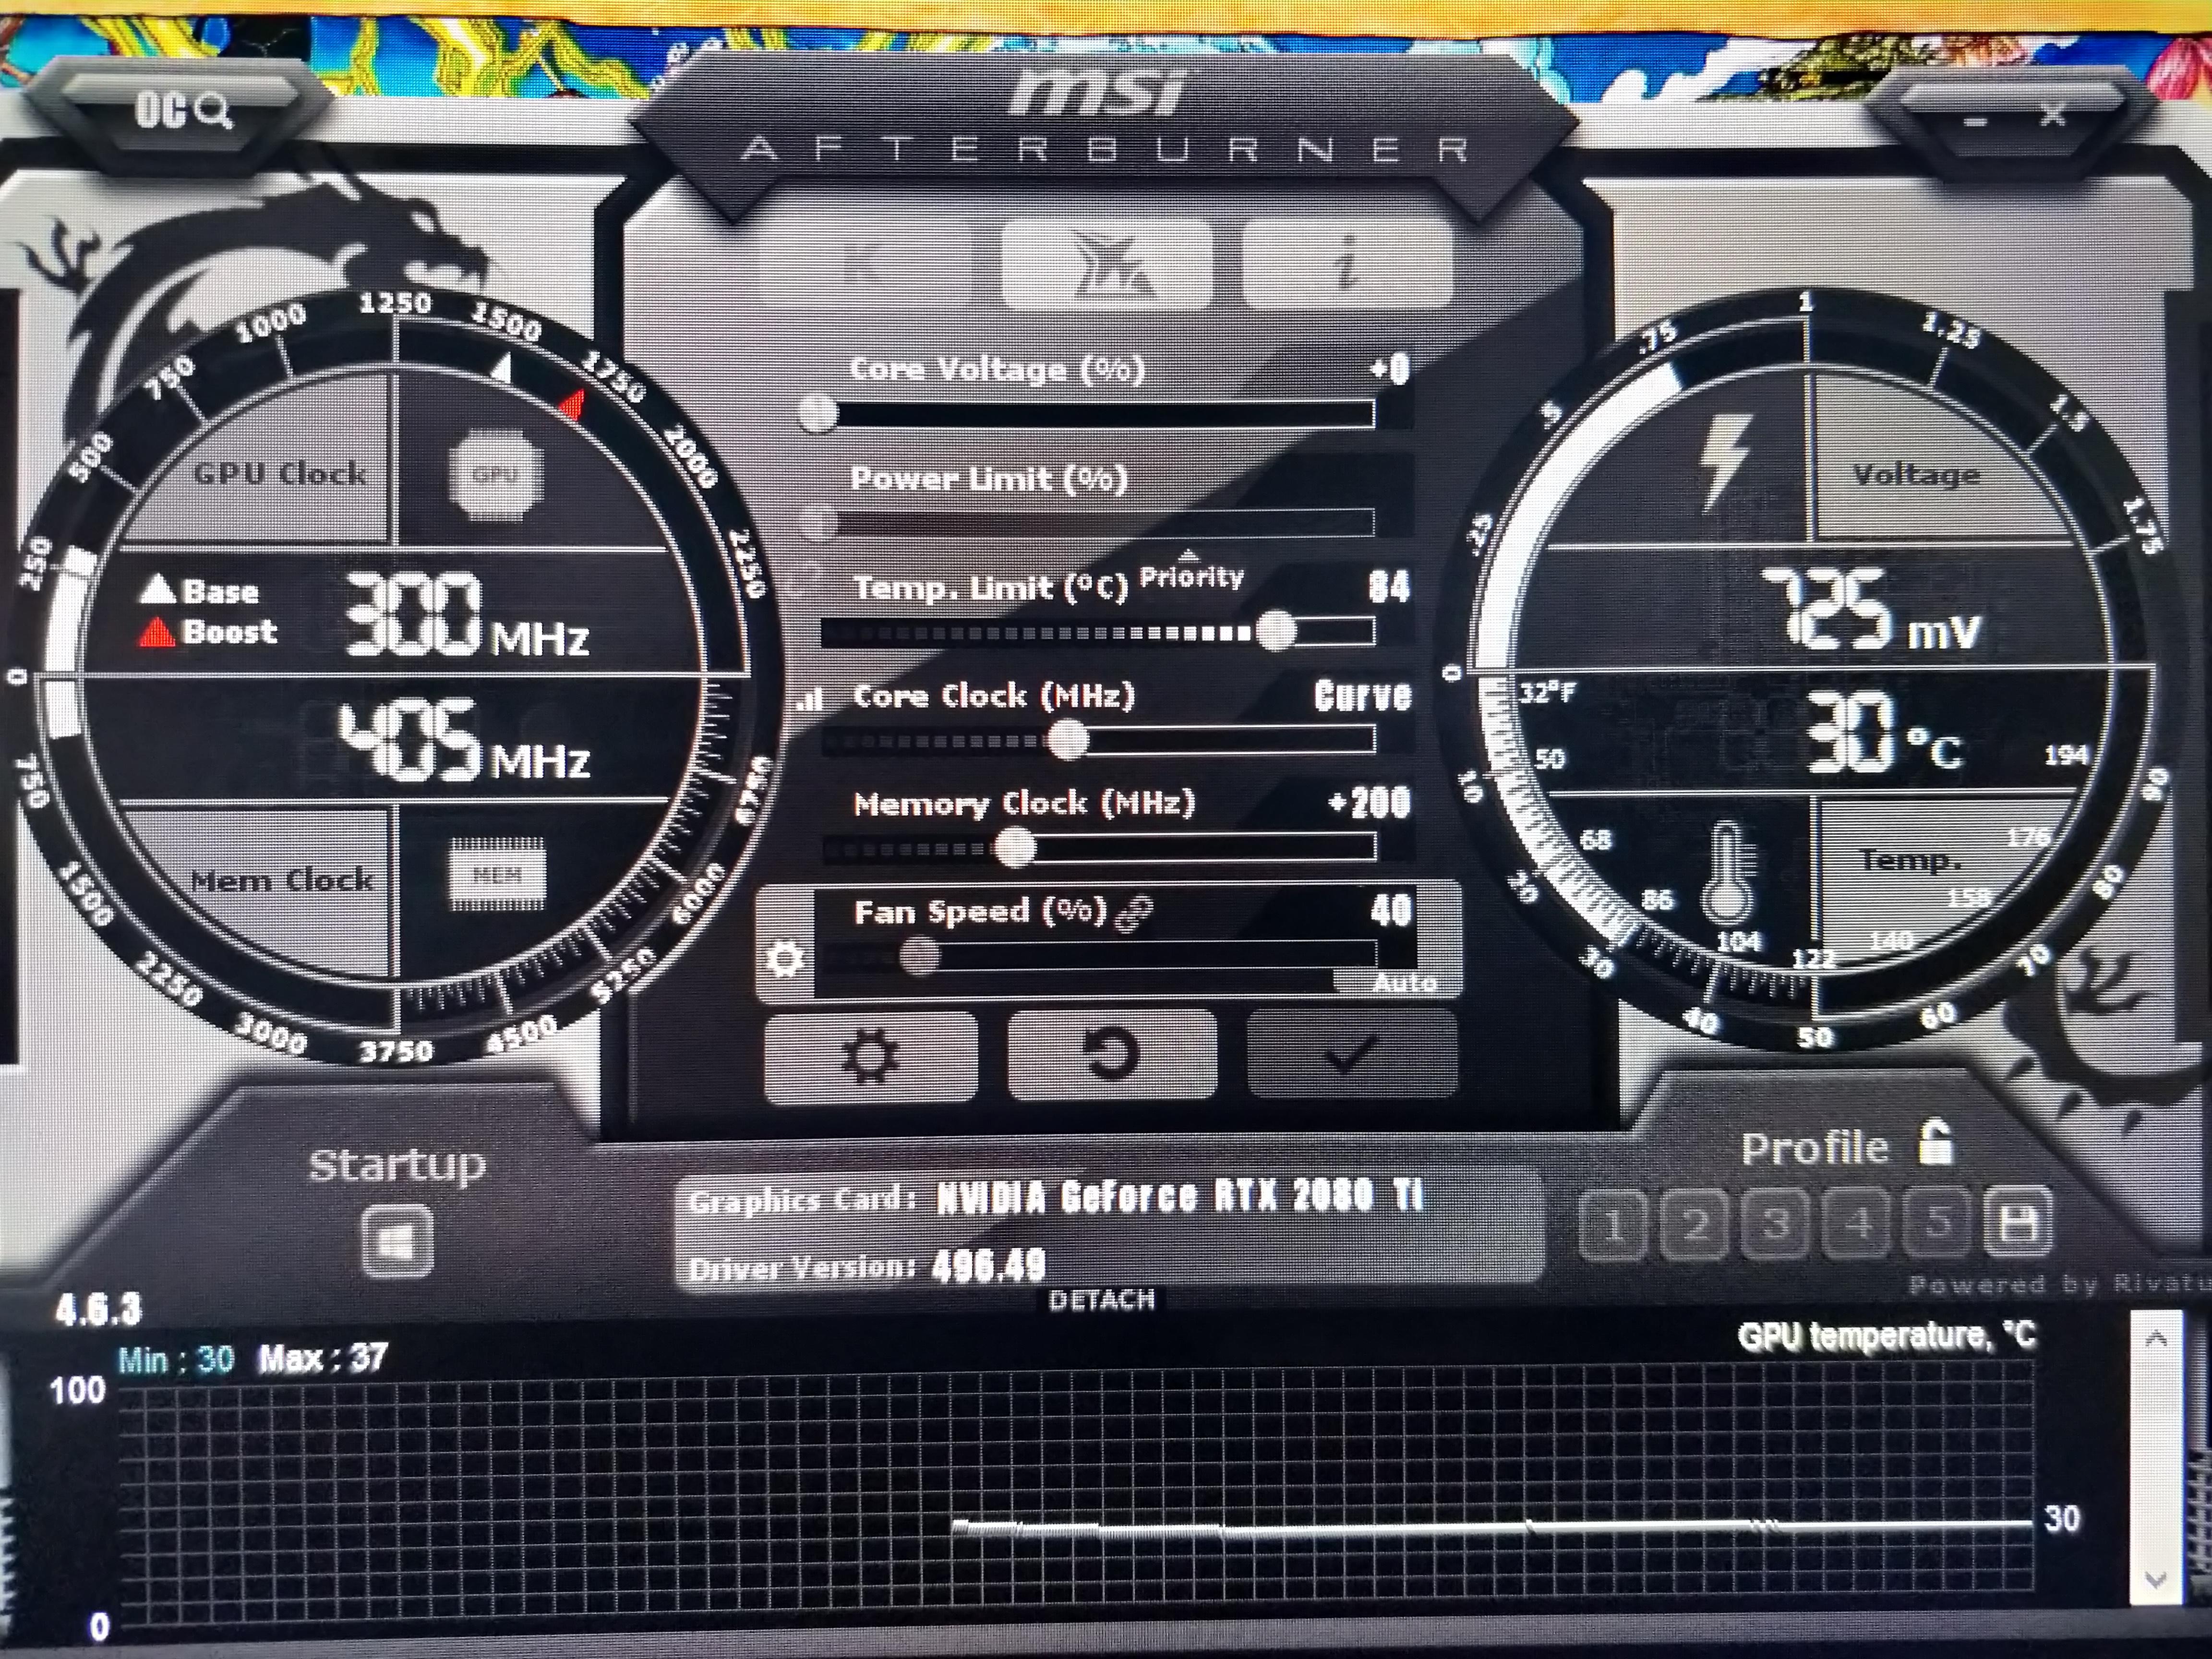 Update your NVIDIA graphics driver to the latest version
Disable any overclocking settings on your GPU